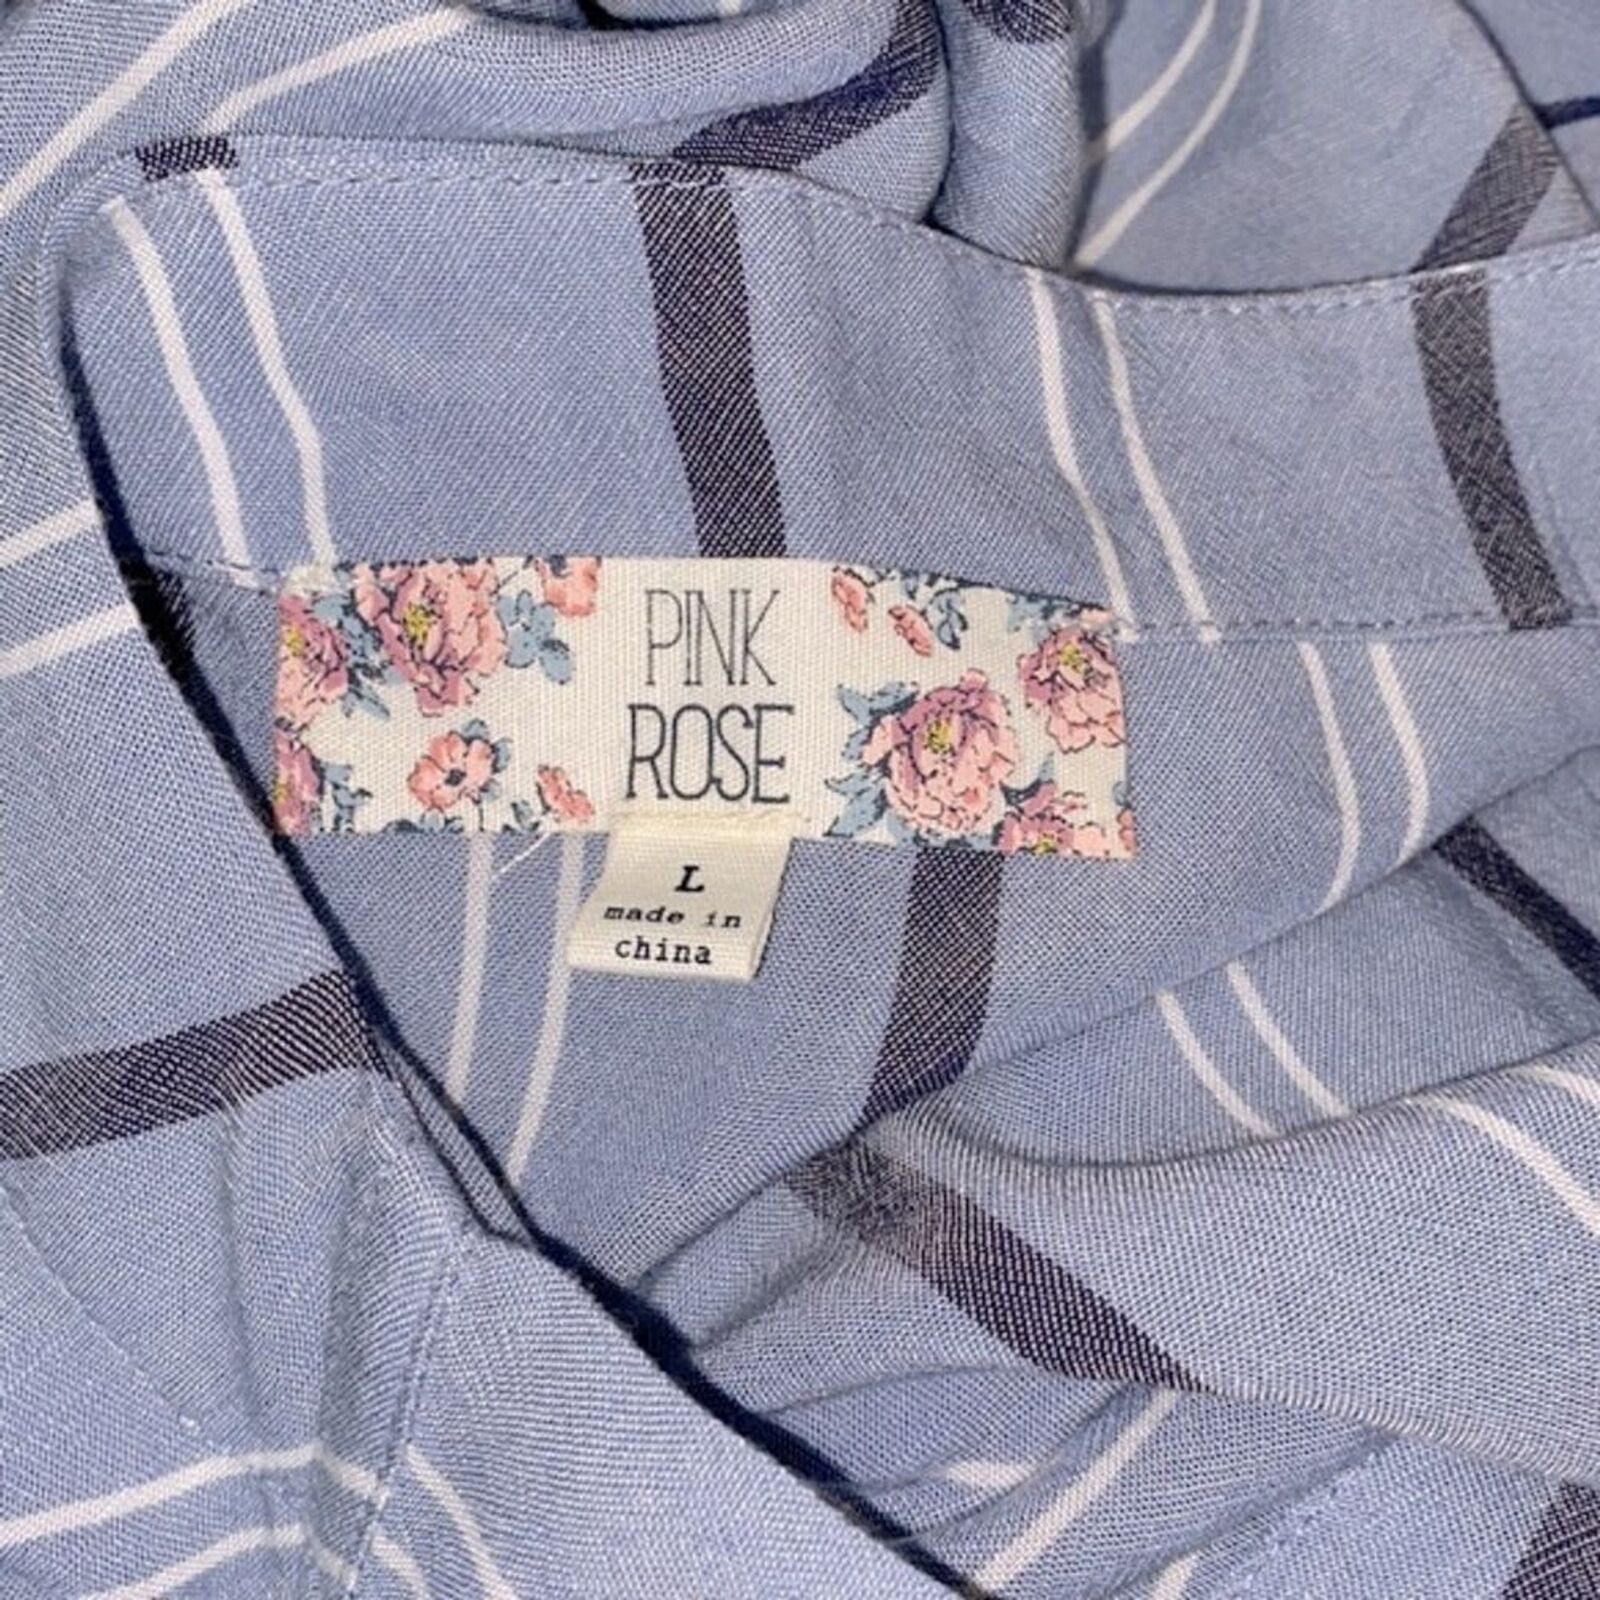 Pink Rose blue striped top tie front size large - image 4